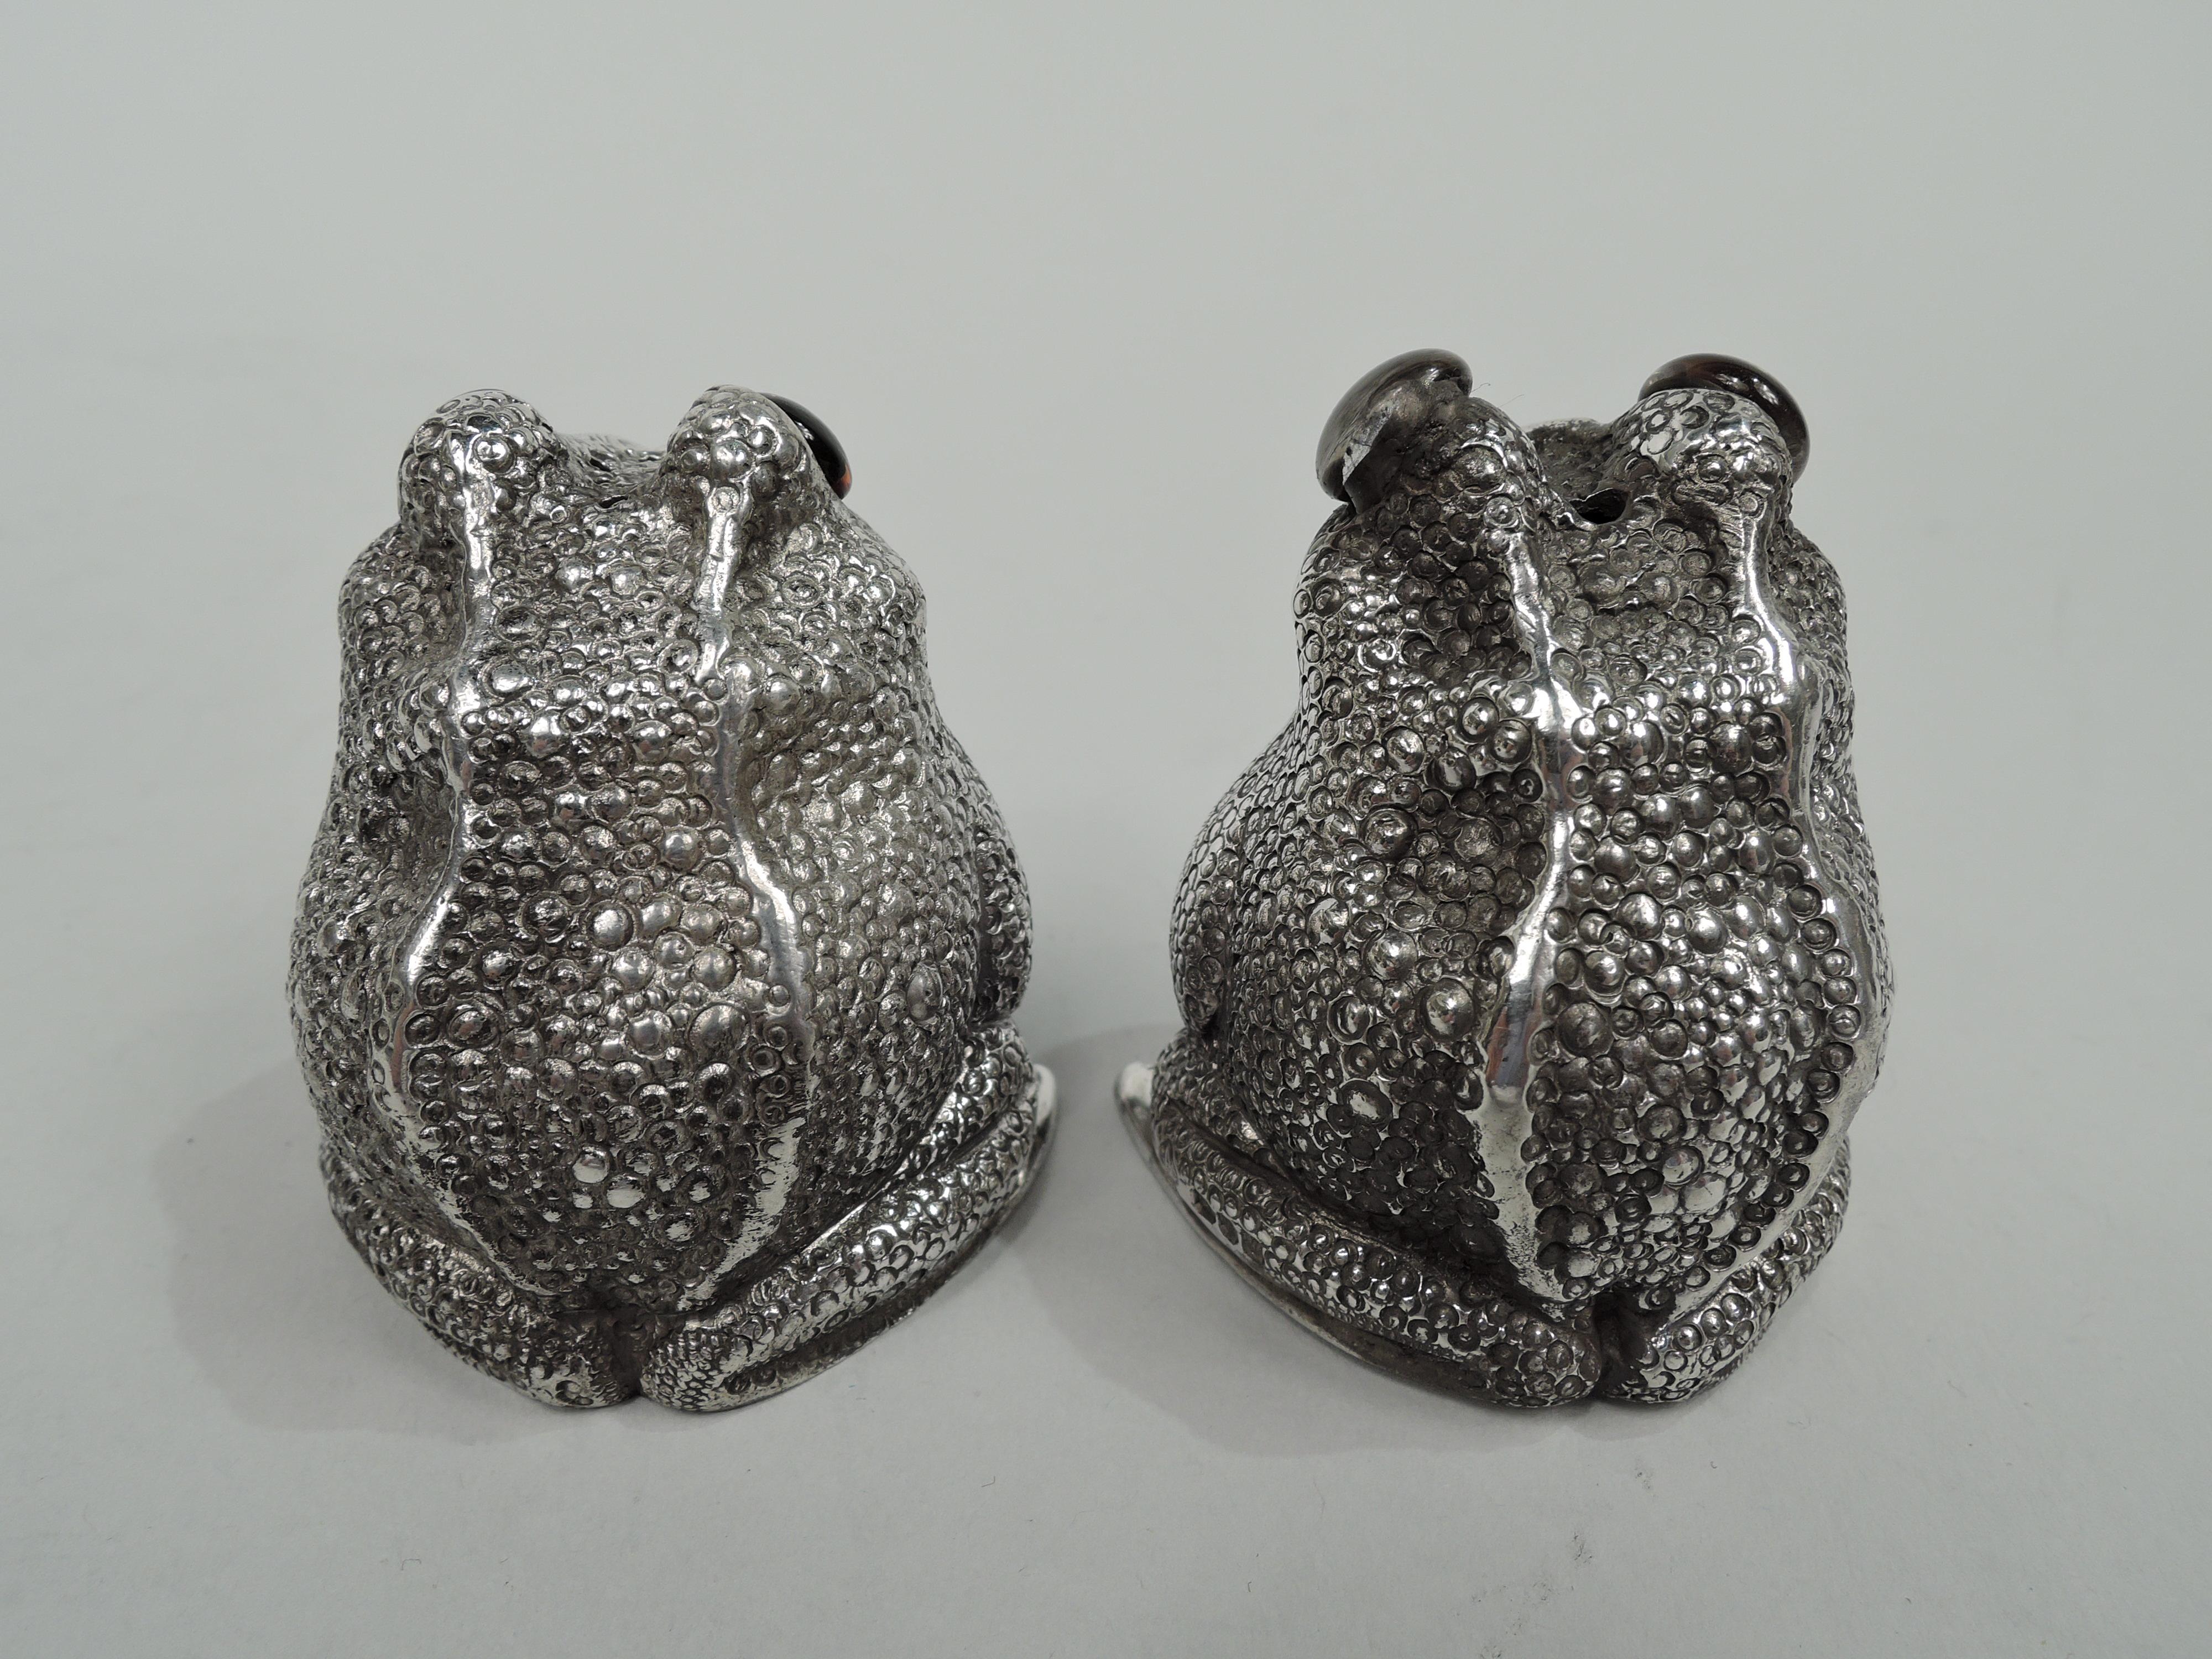 Pair of Elizabeth II sterling silver figural frog salt and pepper shakers. Made by Asprey in London in 1967-8. Each: A squatting, smirking reptile with glass exophthalmic eyes, and scaly back. Head top pierced. Underside has plastic plug. Fully